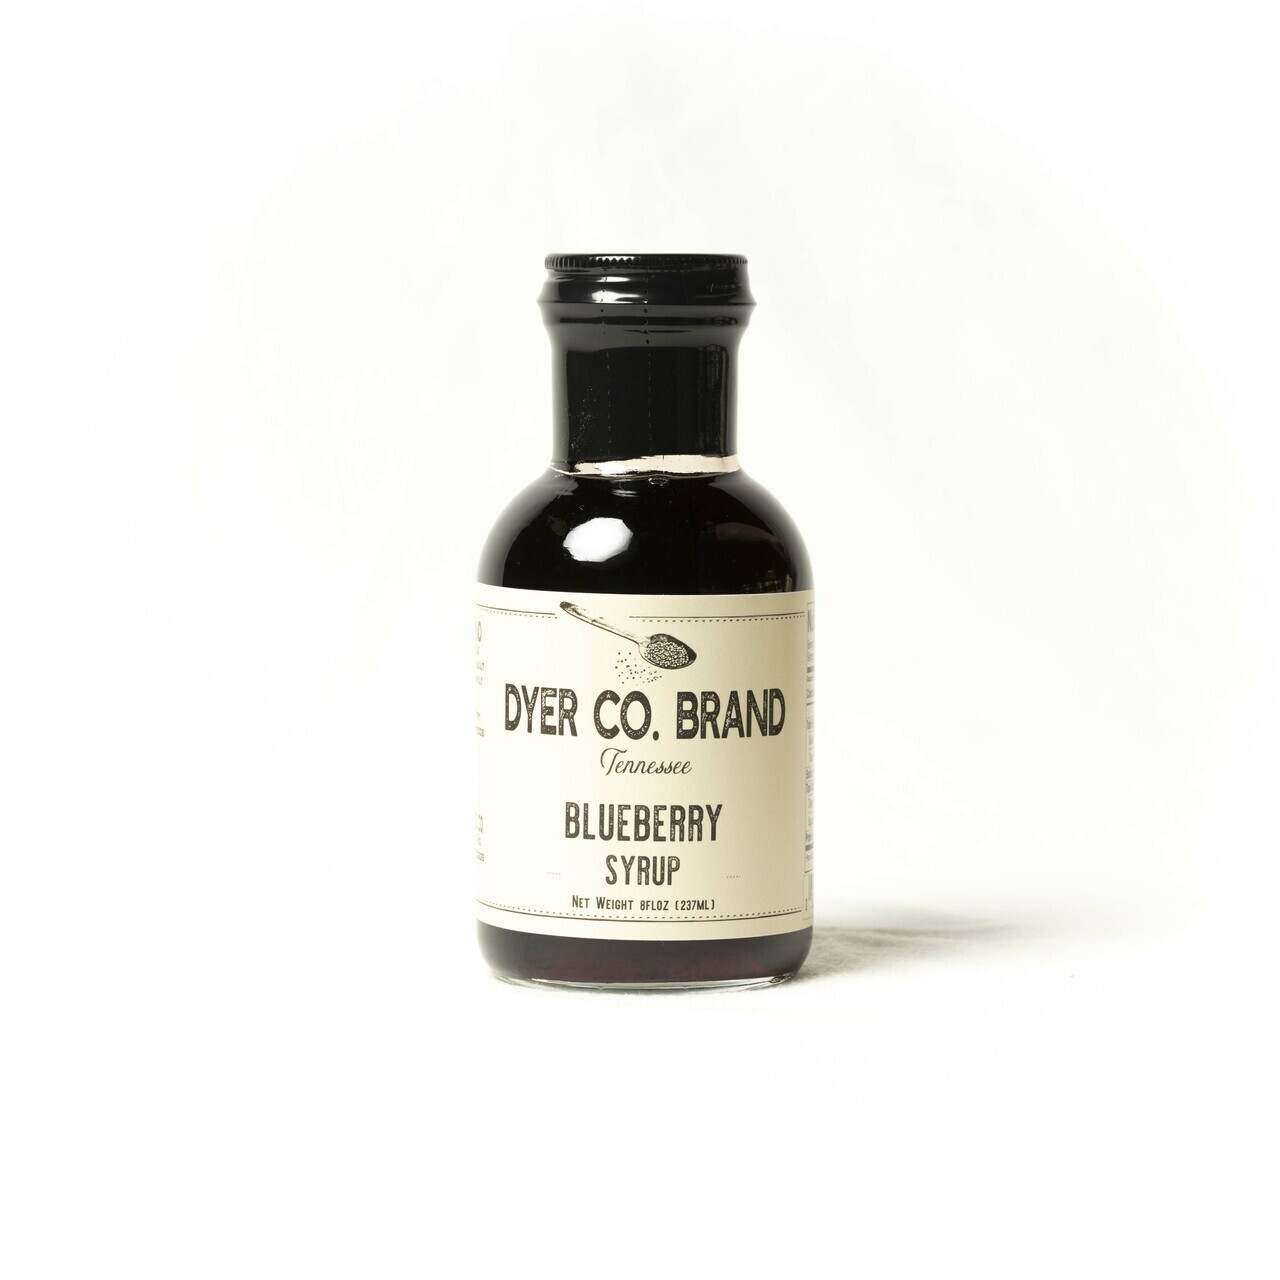 Dyer Co Brand Blueberry Syrup